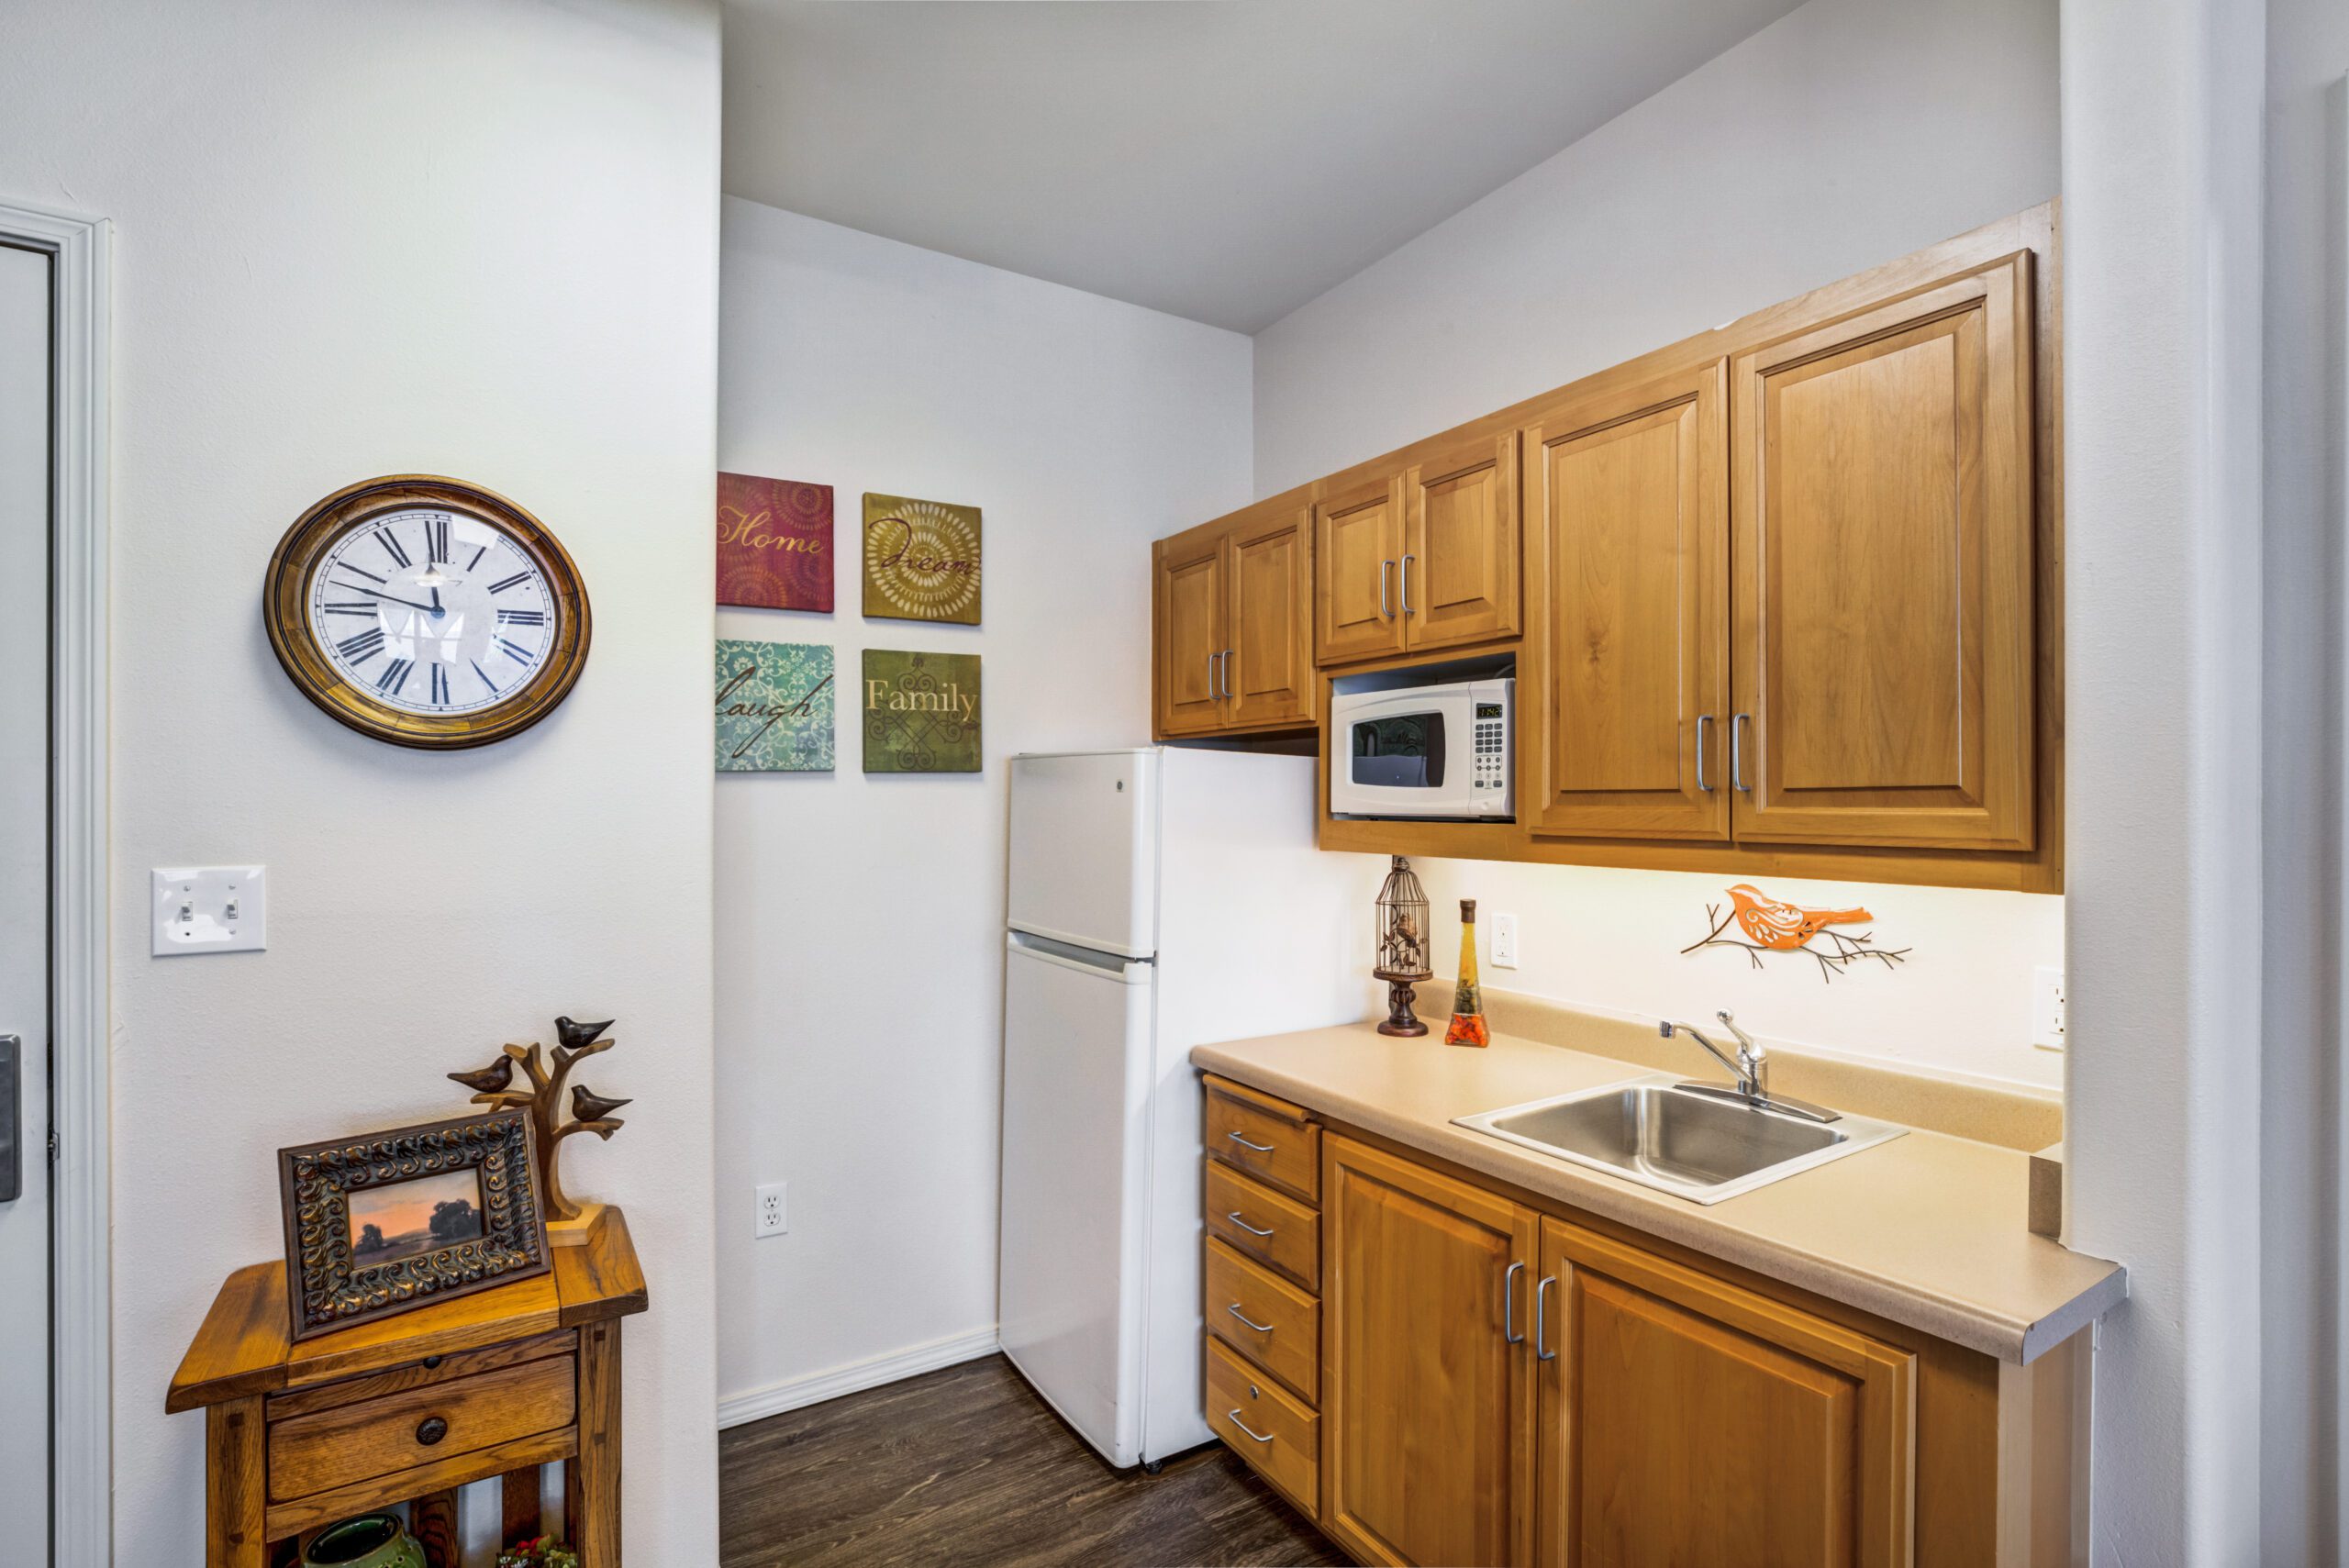 A kitchen with a fridge, microwave and cabinets